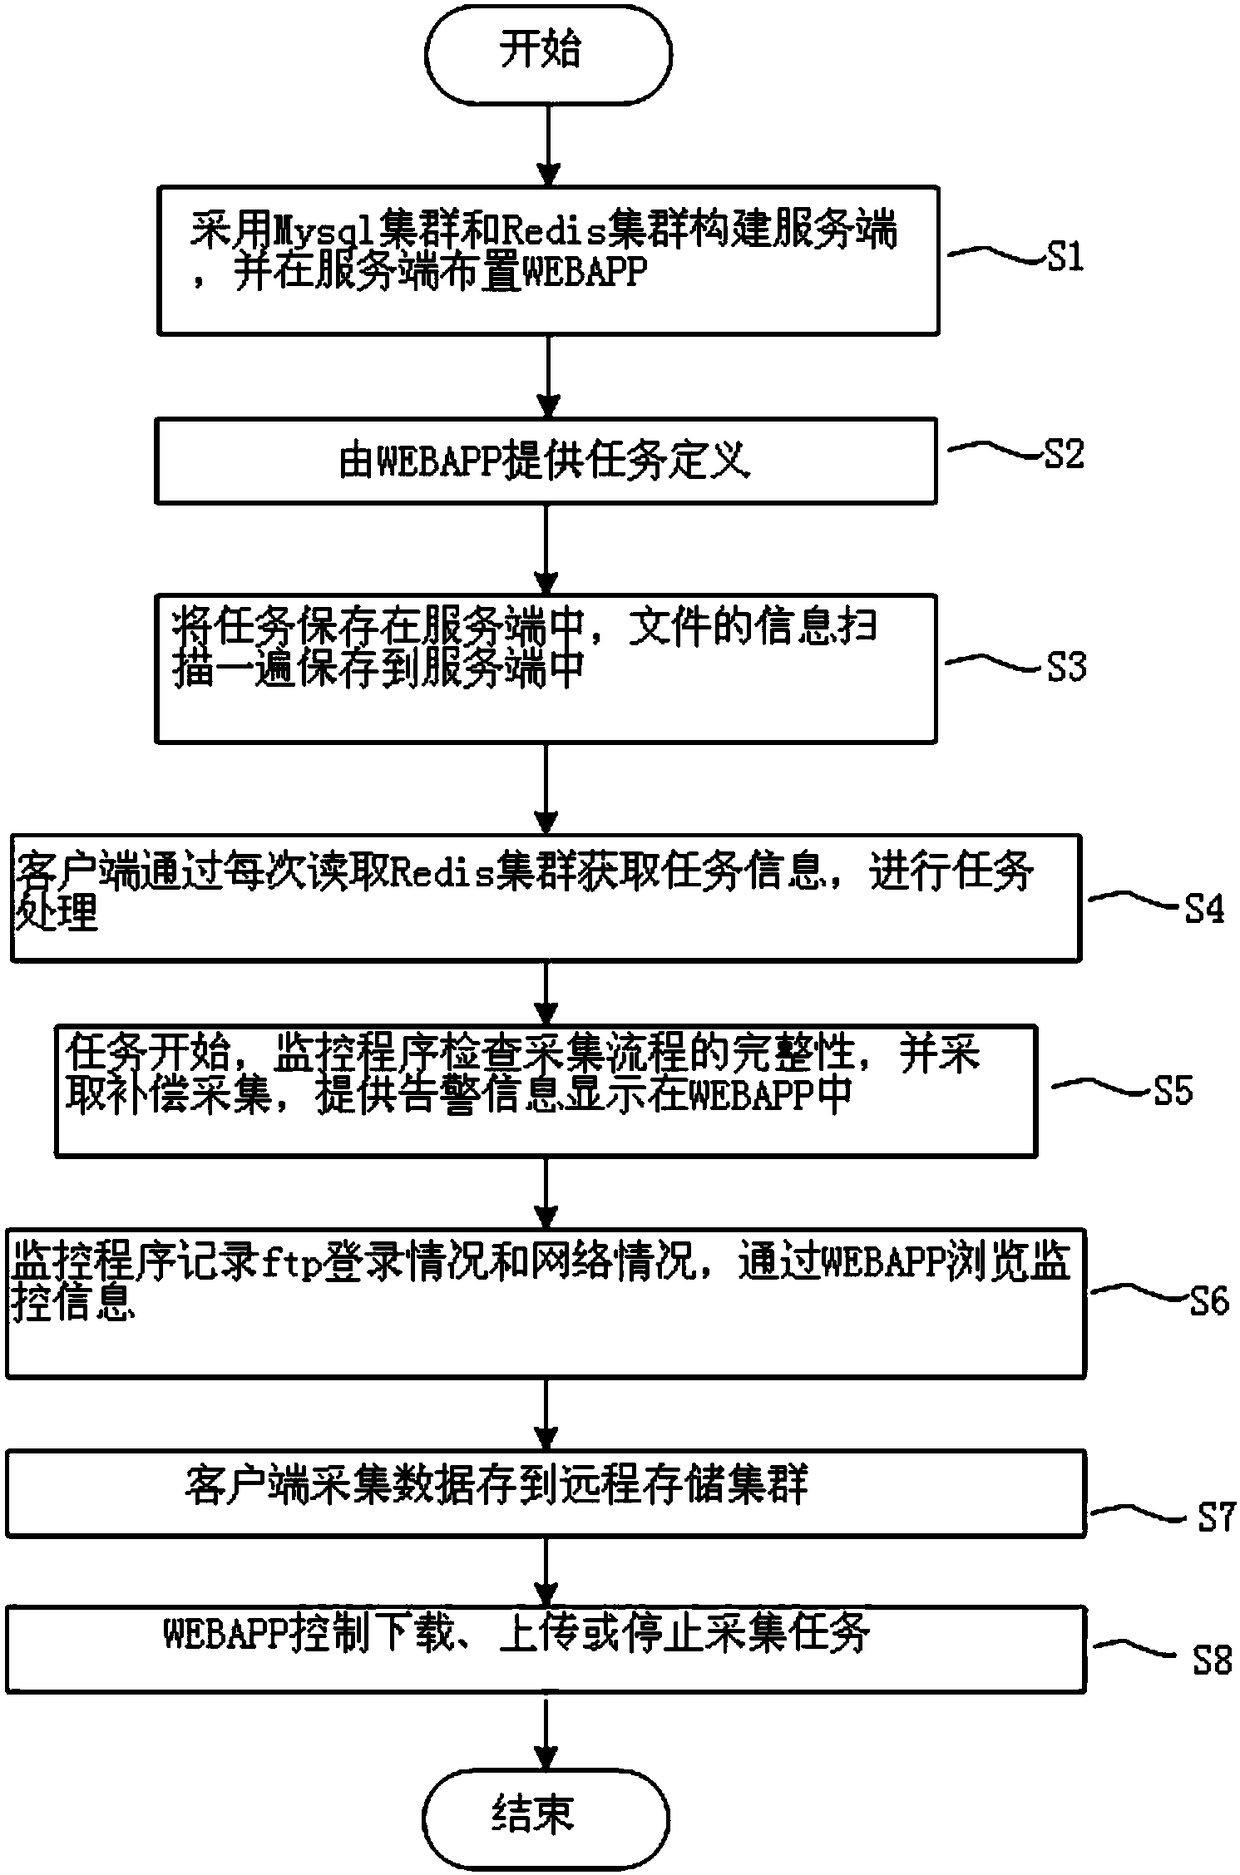 Distributed file acquisition monitoring method